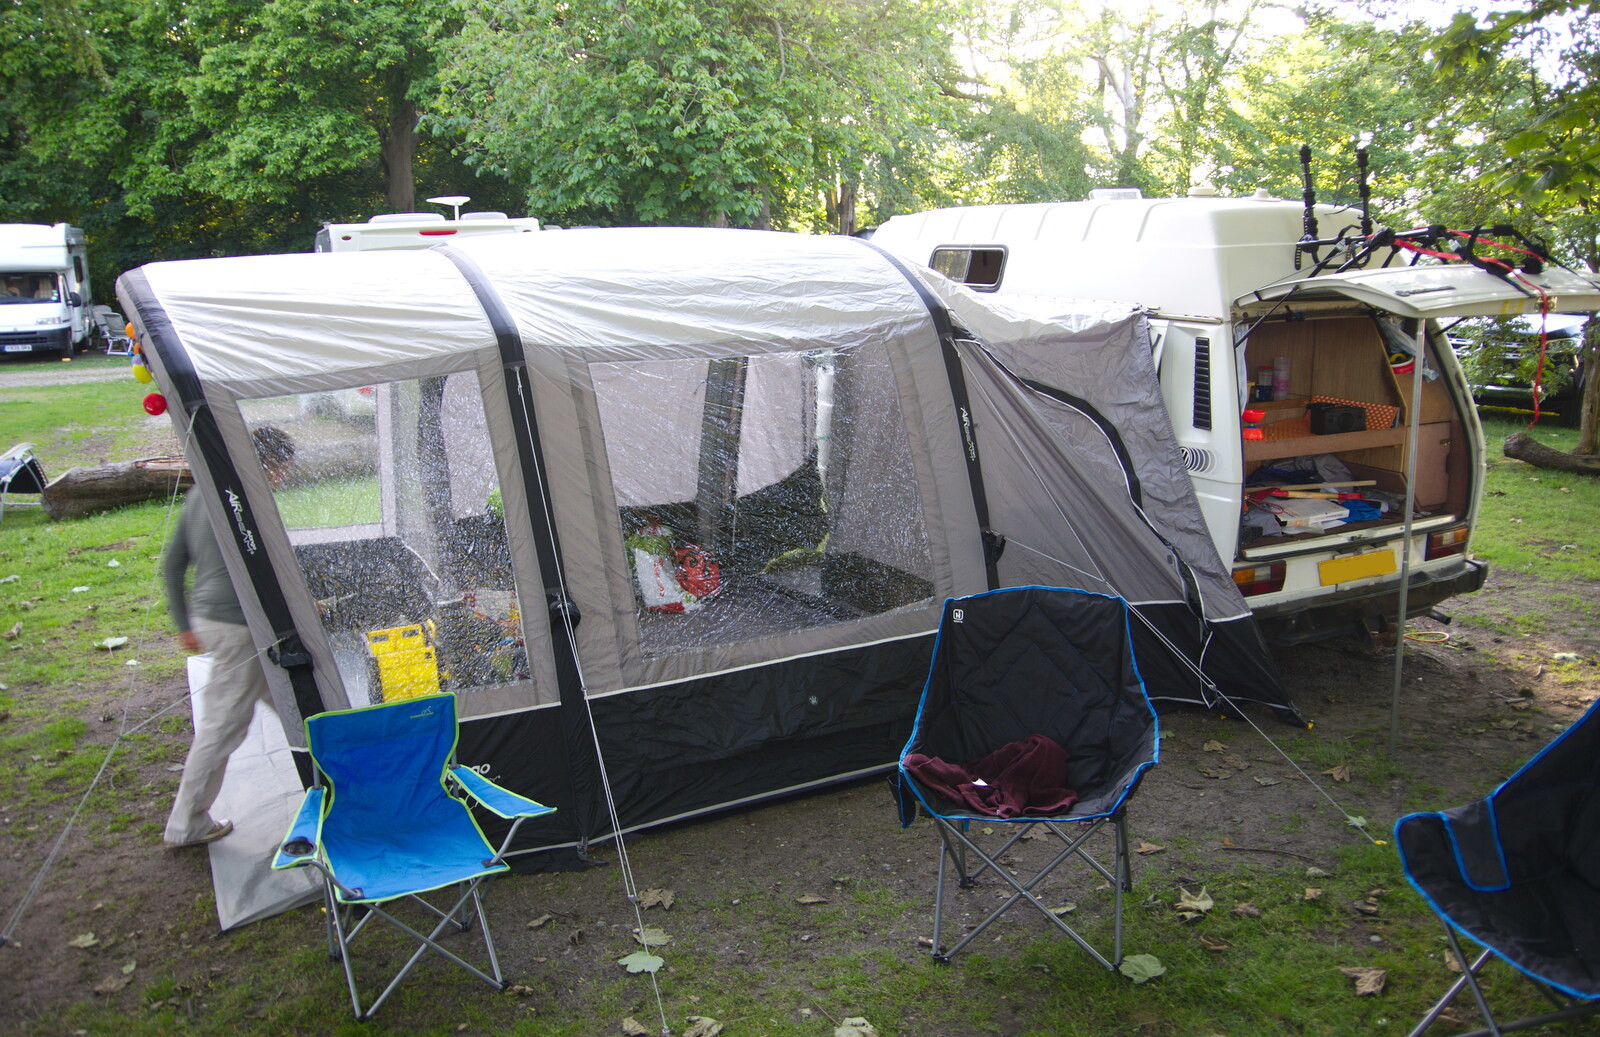 We get the the new awning up in 10 minutes from Cliff House Camping, Dunwich, Suffolk - 15th June 2019